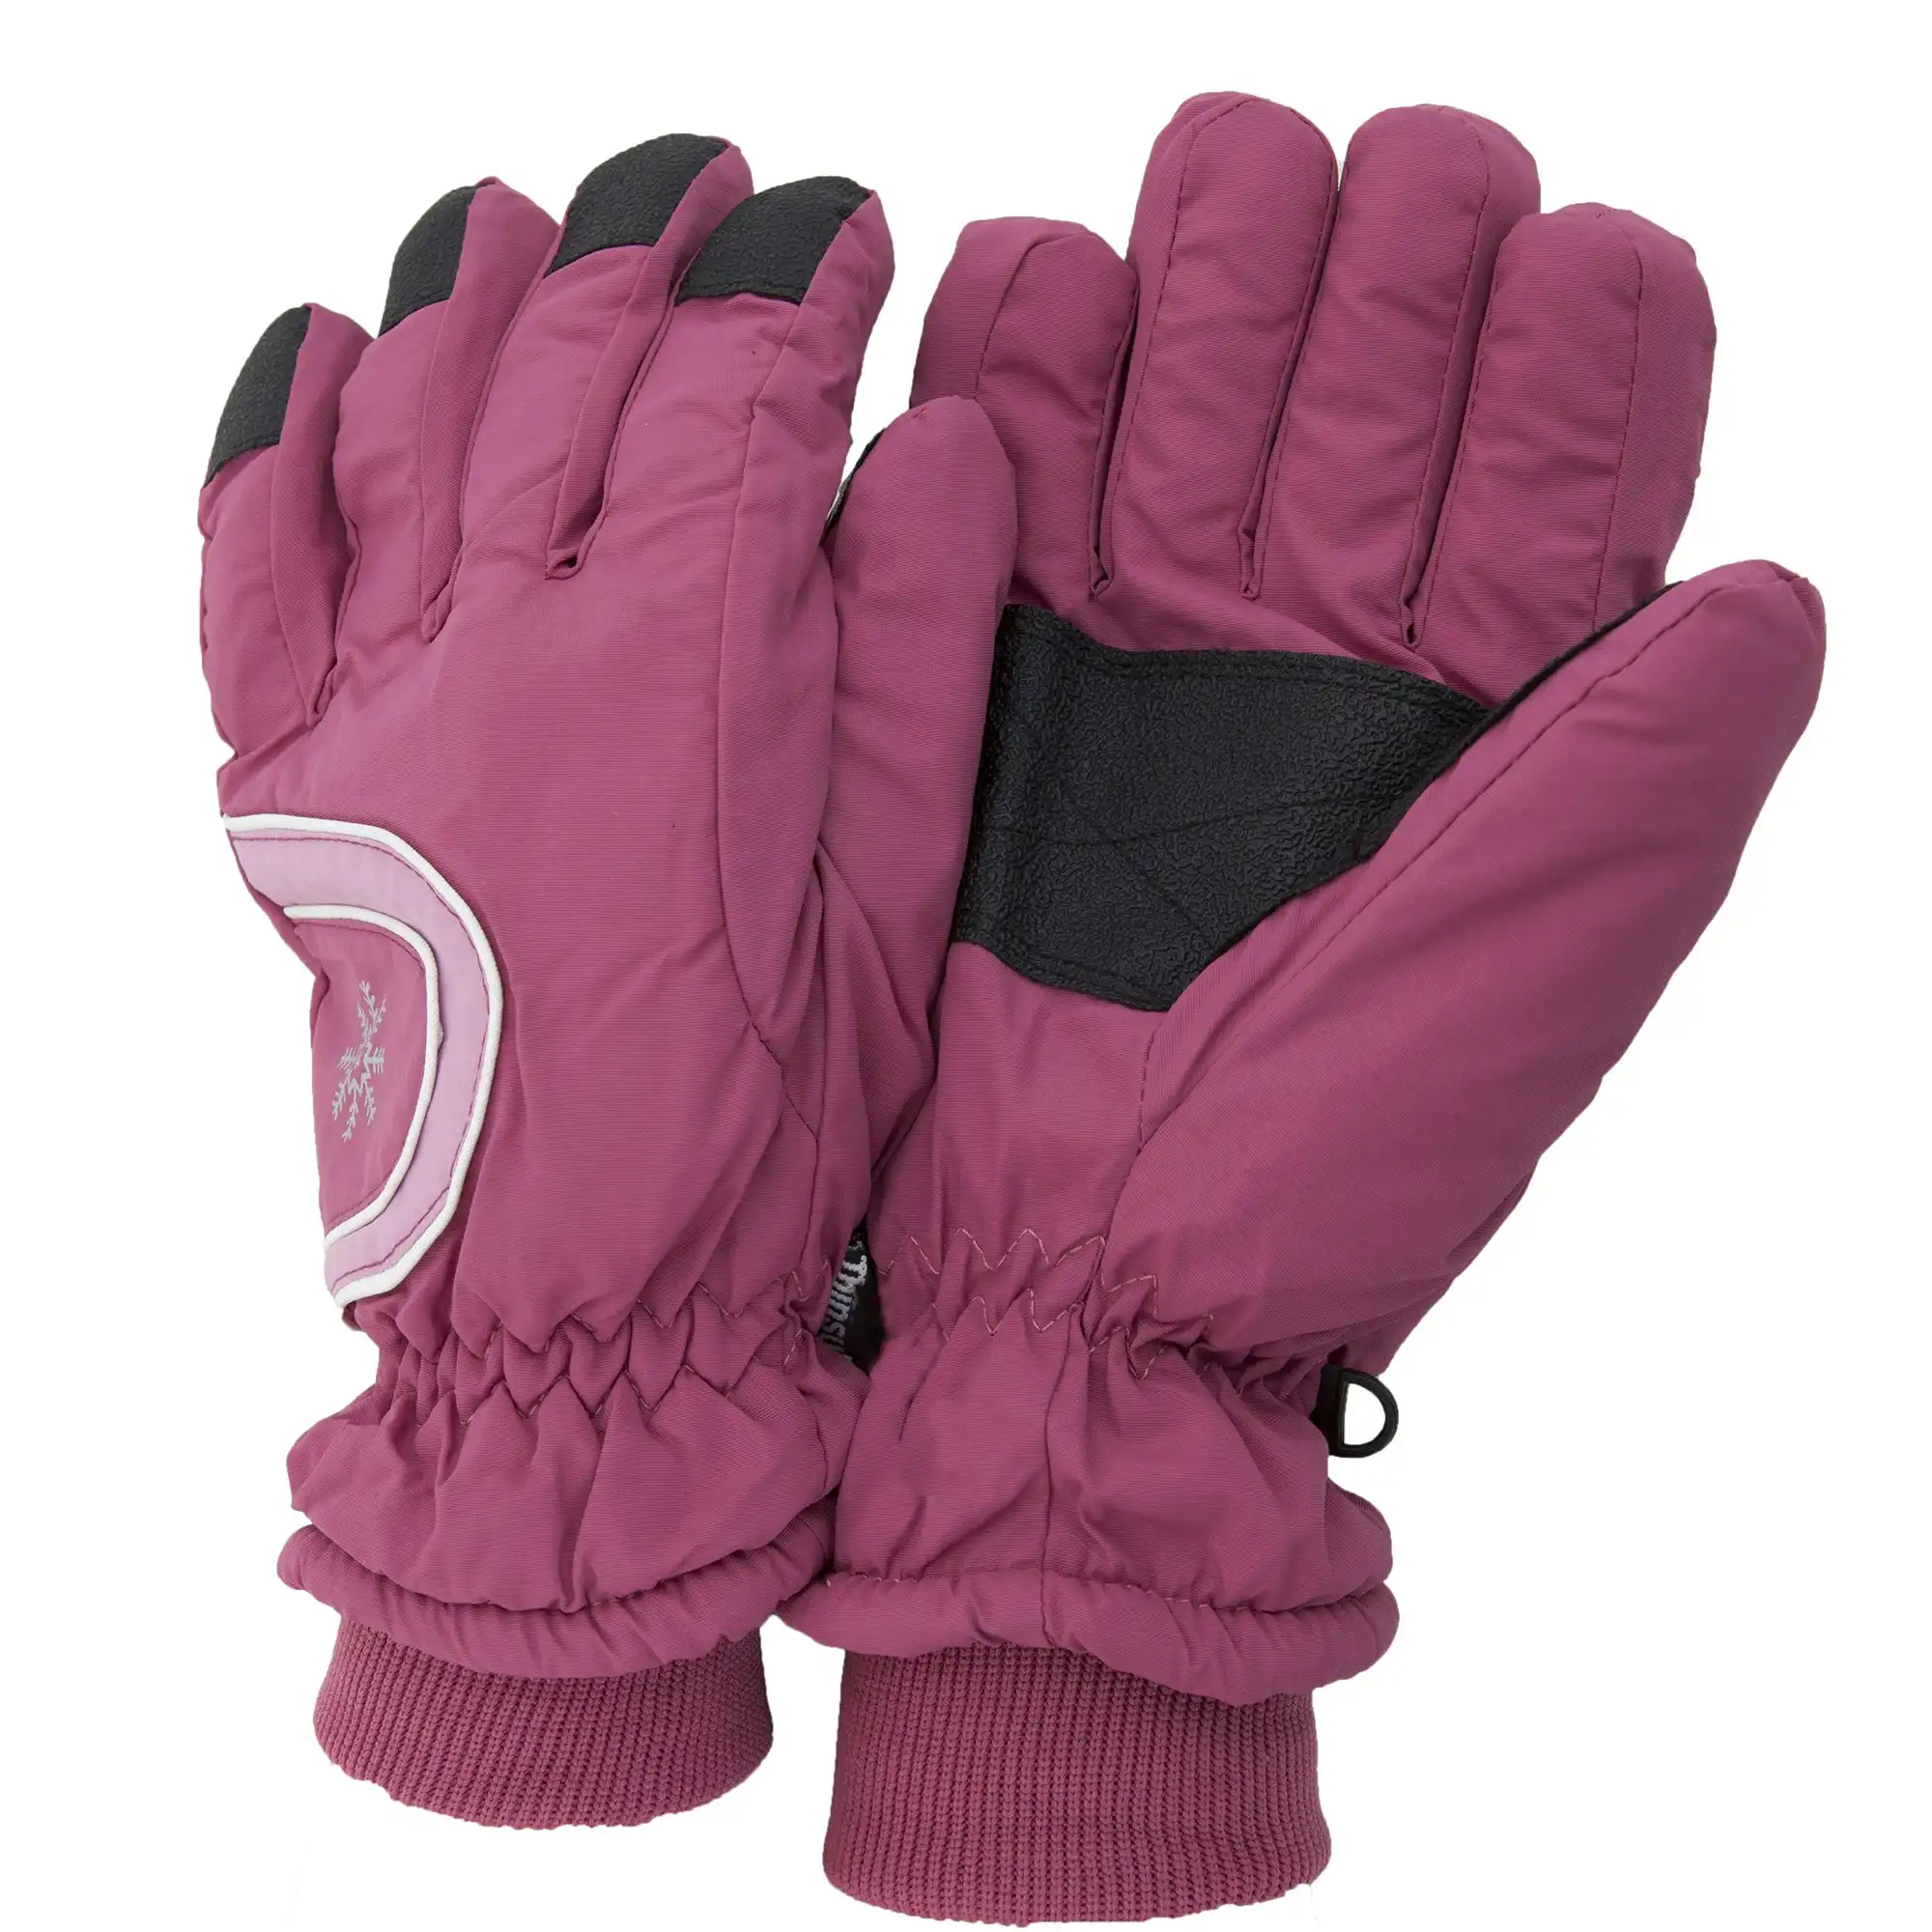 Floso Ladies/Womens Thinsulate Extra Warm Thermal Padded Winter/Ski Gloves With Palm Grip (3M 40g)